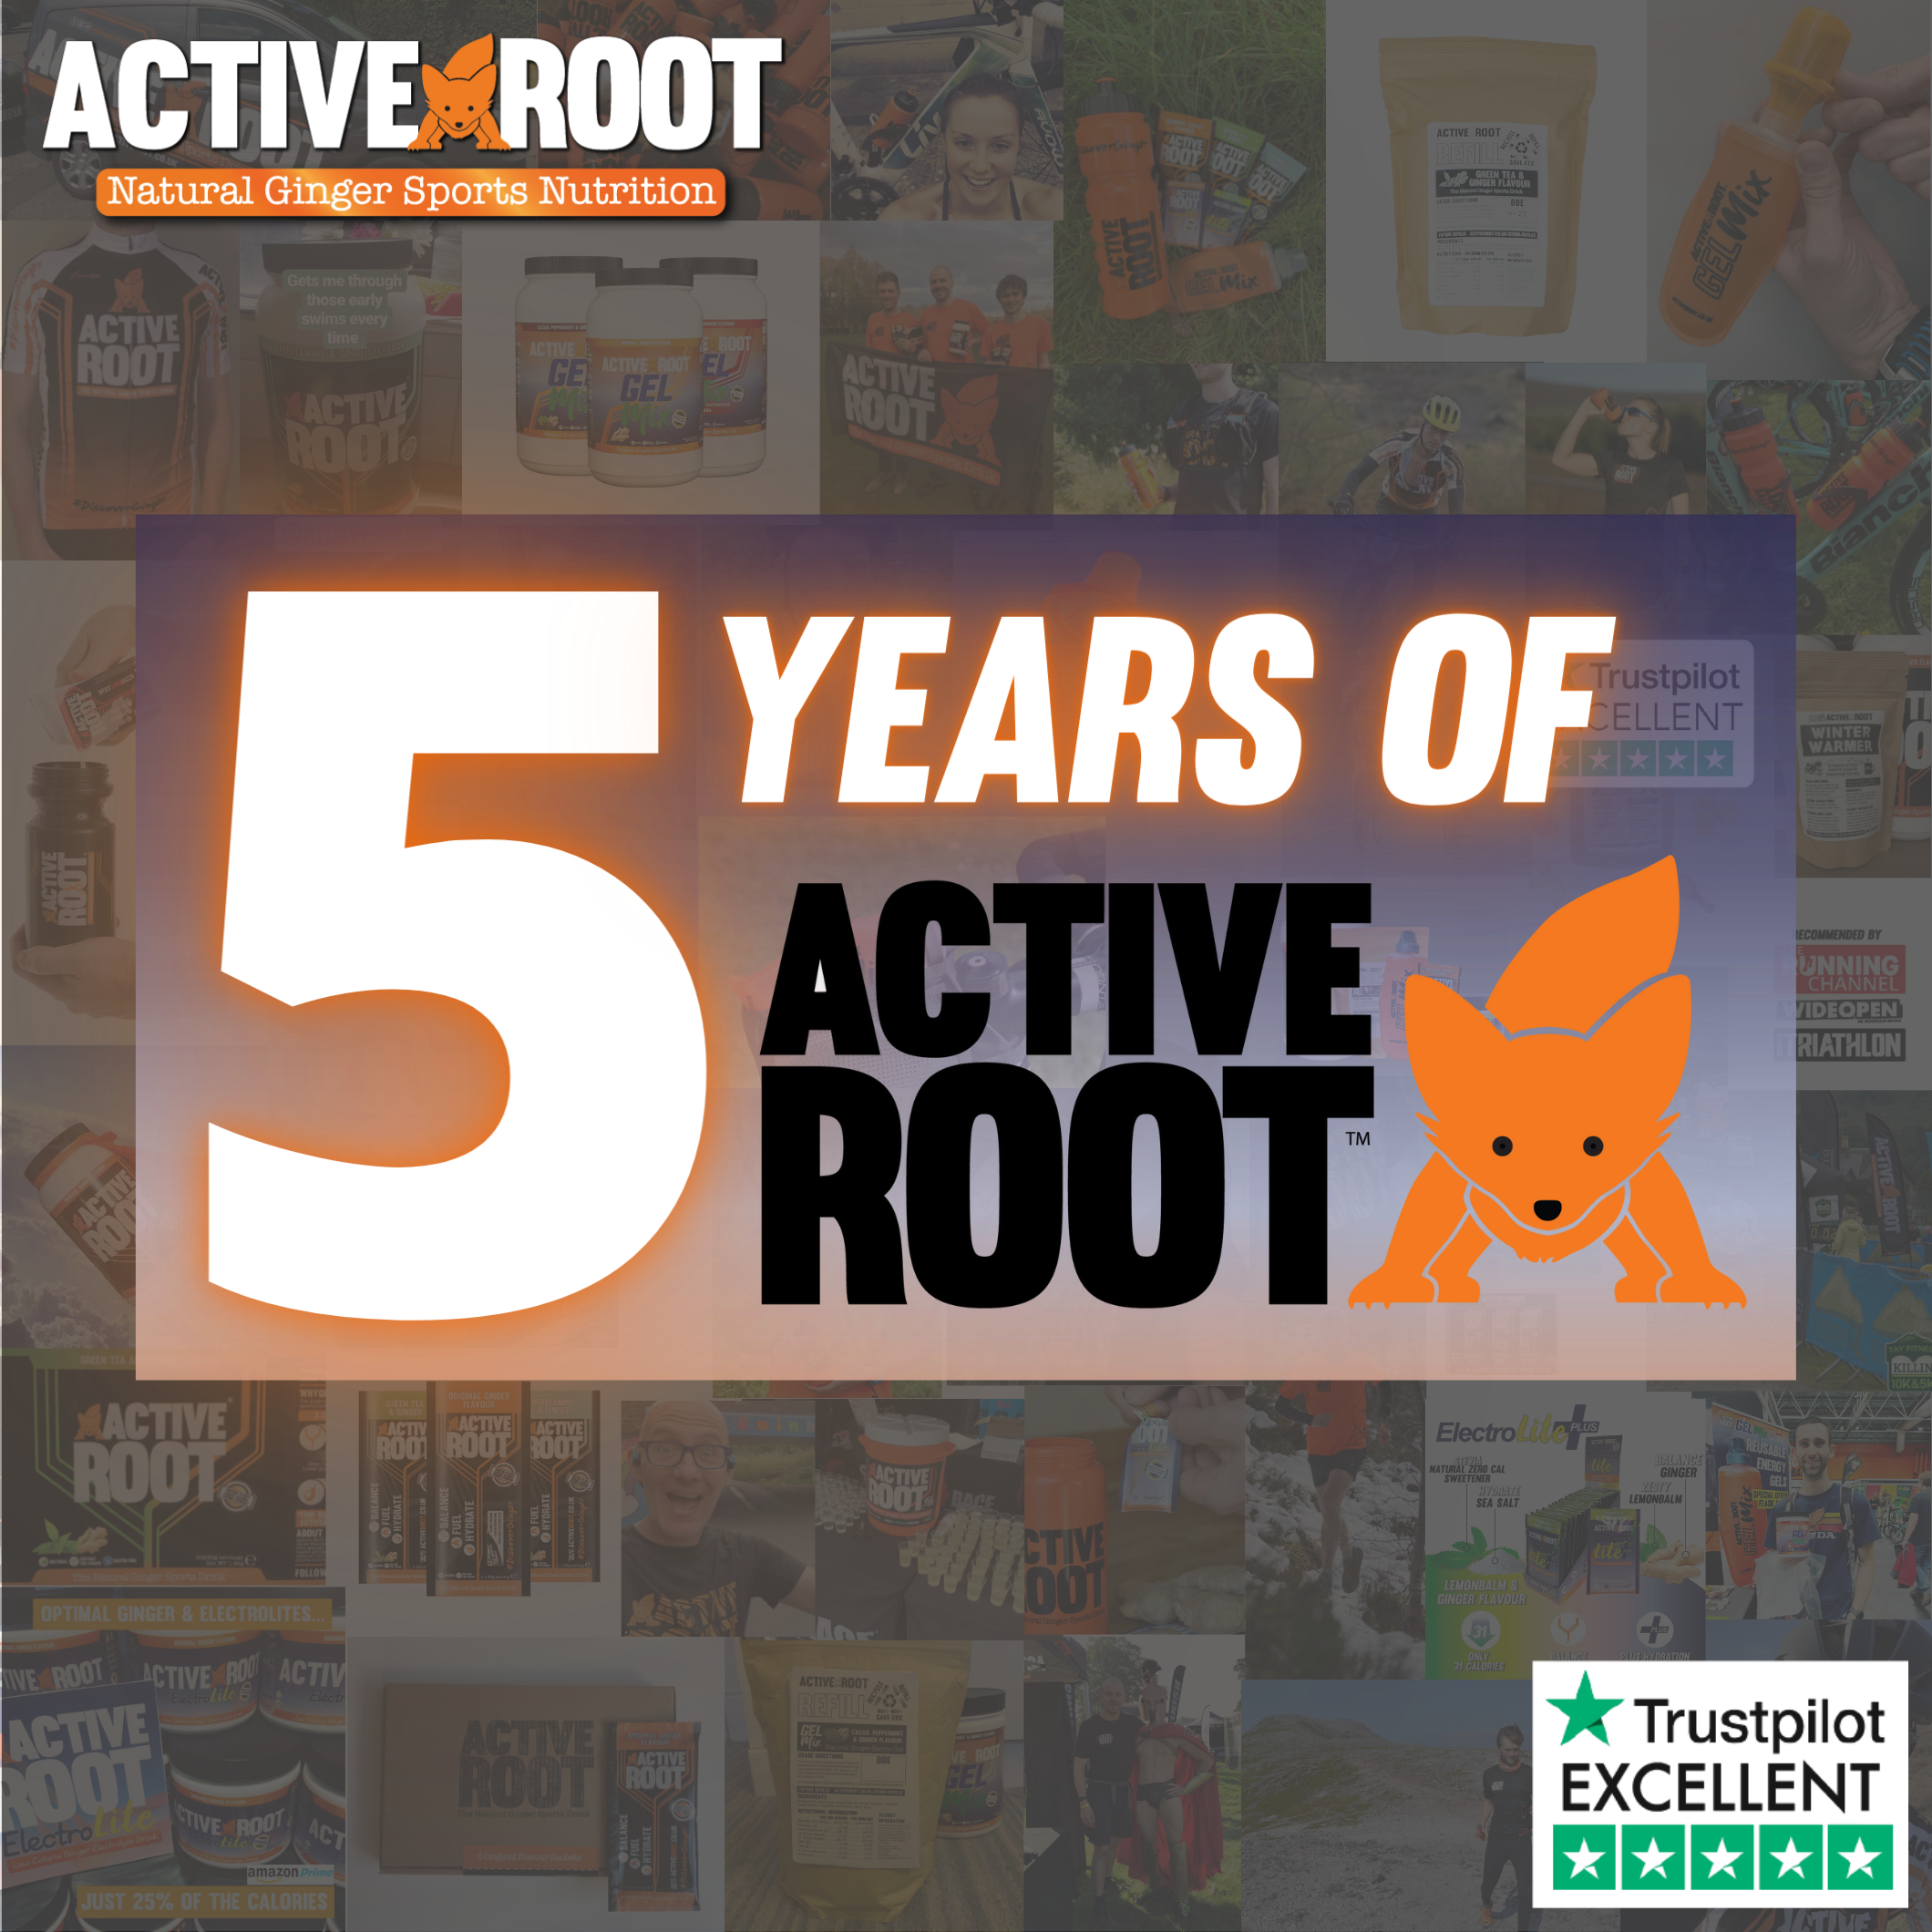 5 years of Active Root - 2020